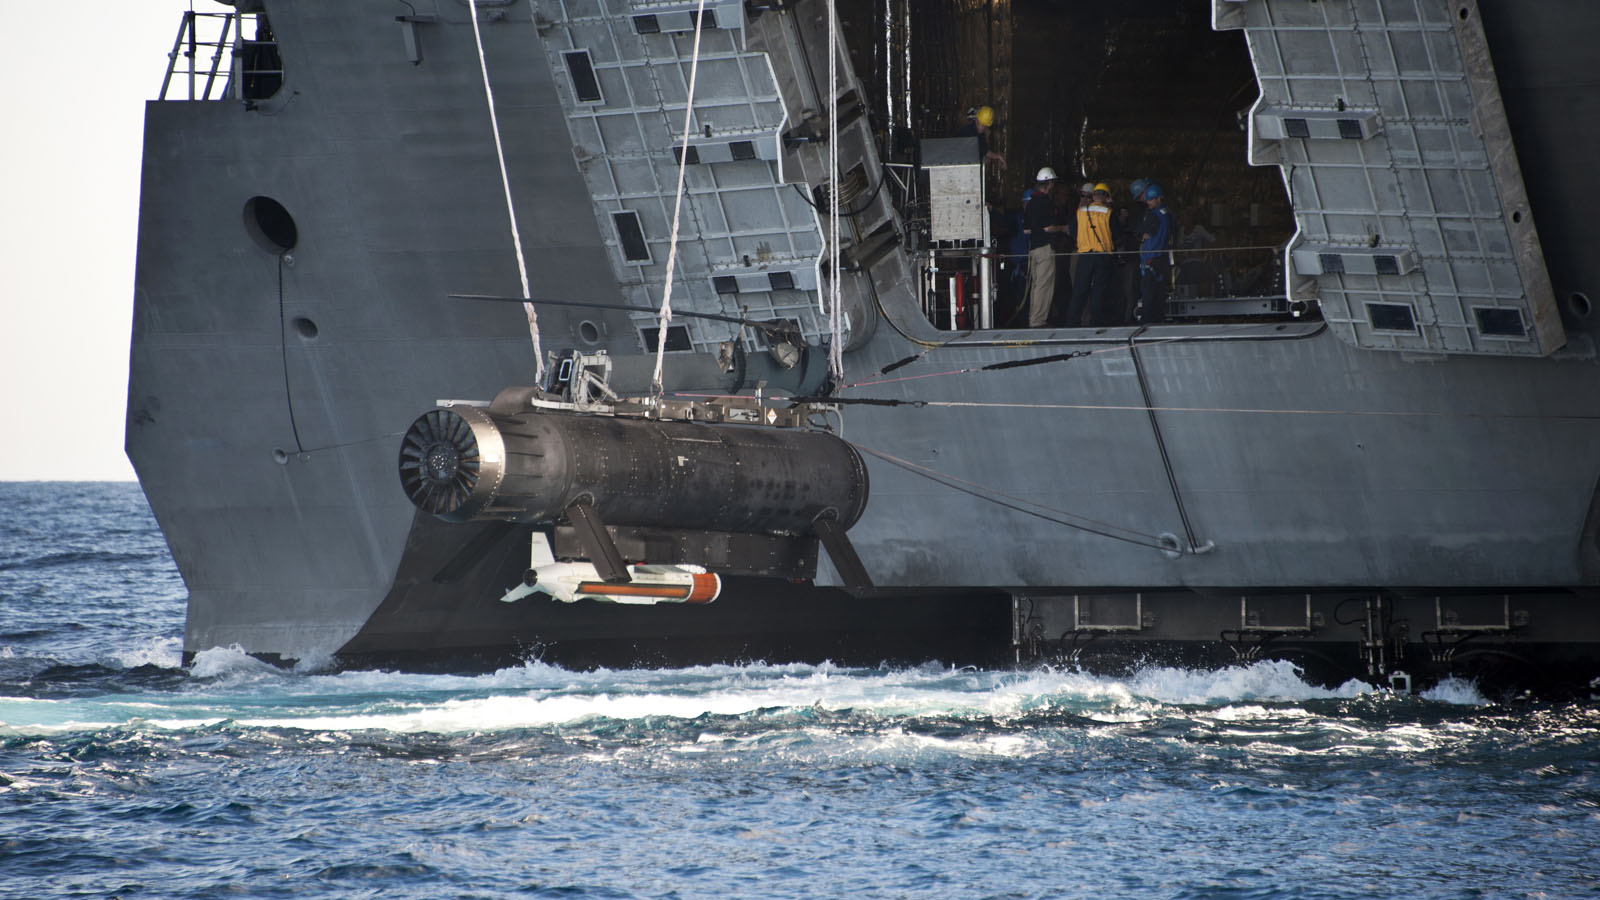 Raytheon’s New Real-Life Minesweeper Will Make Seas Safer For Sailors